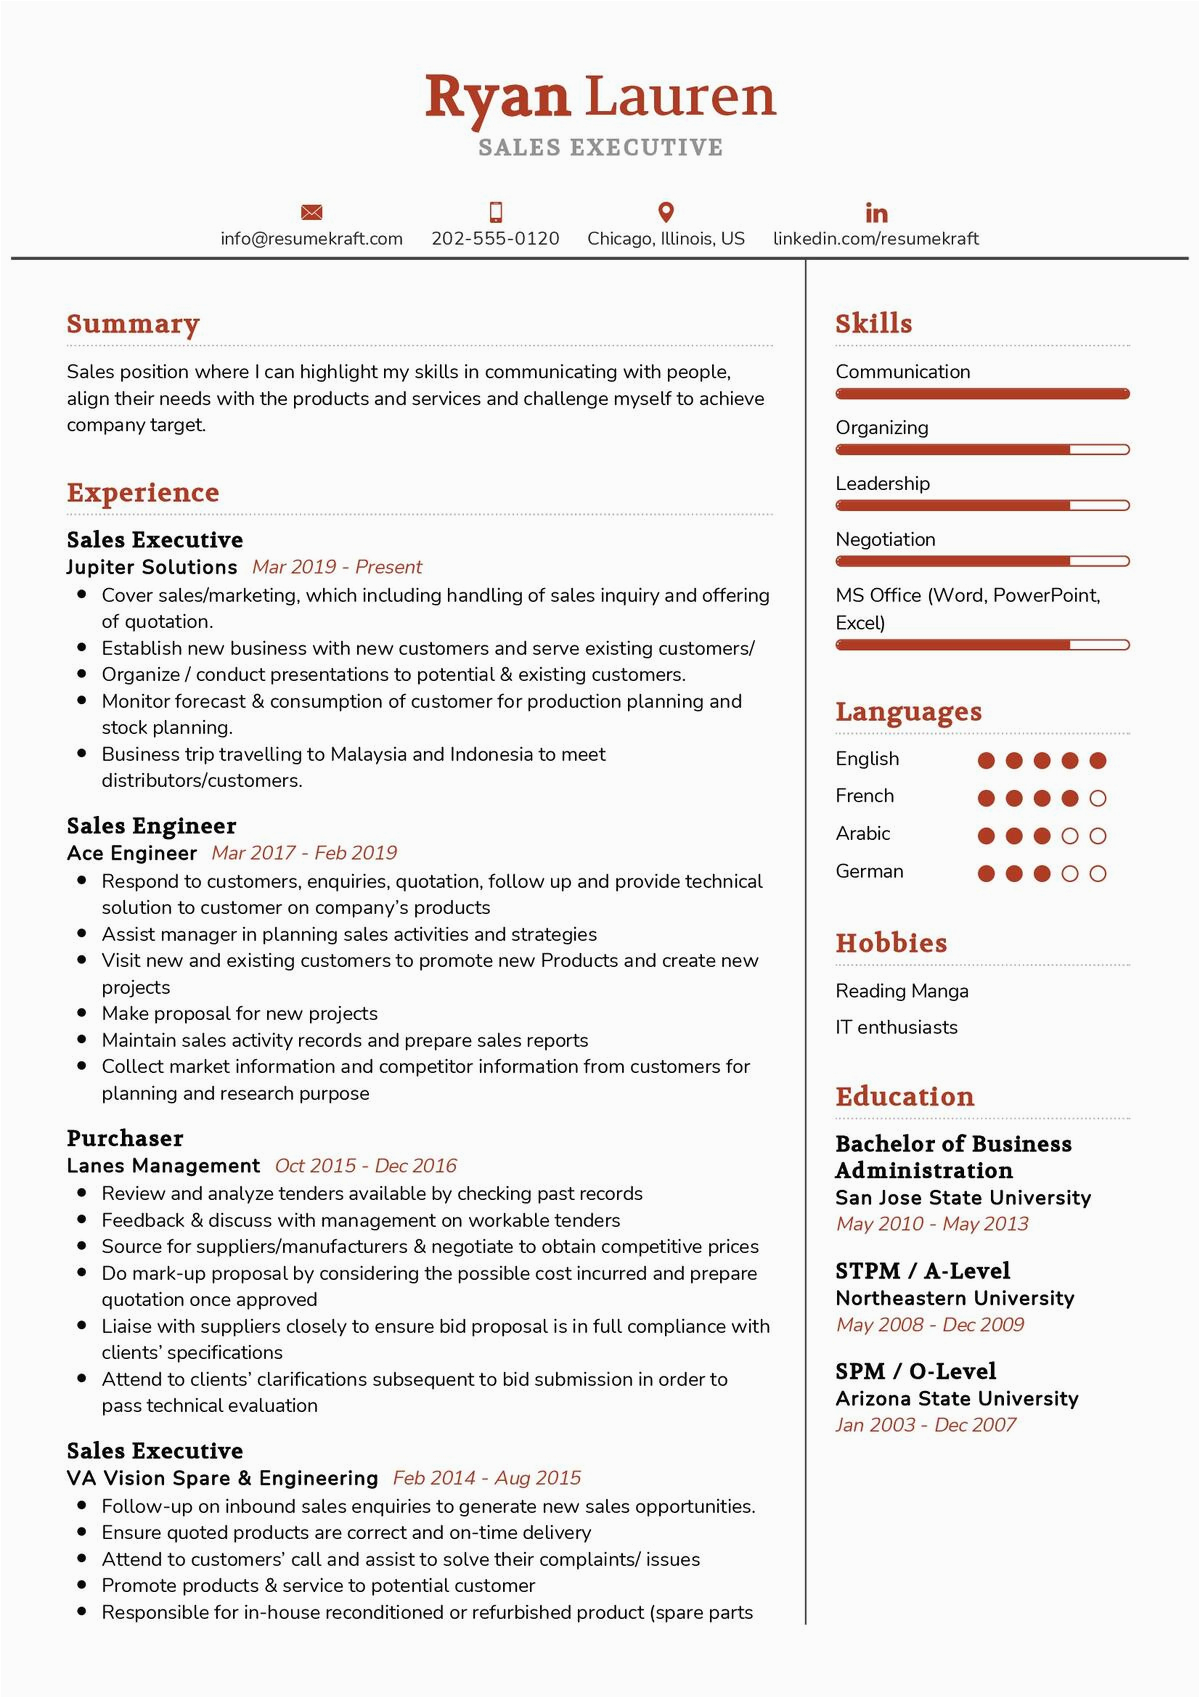 Sample Sales New Business Executive Resume Sales Executive Resume Example Resumekraft